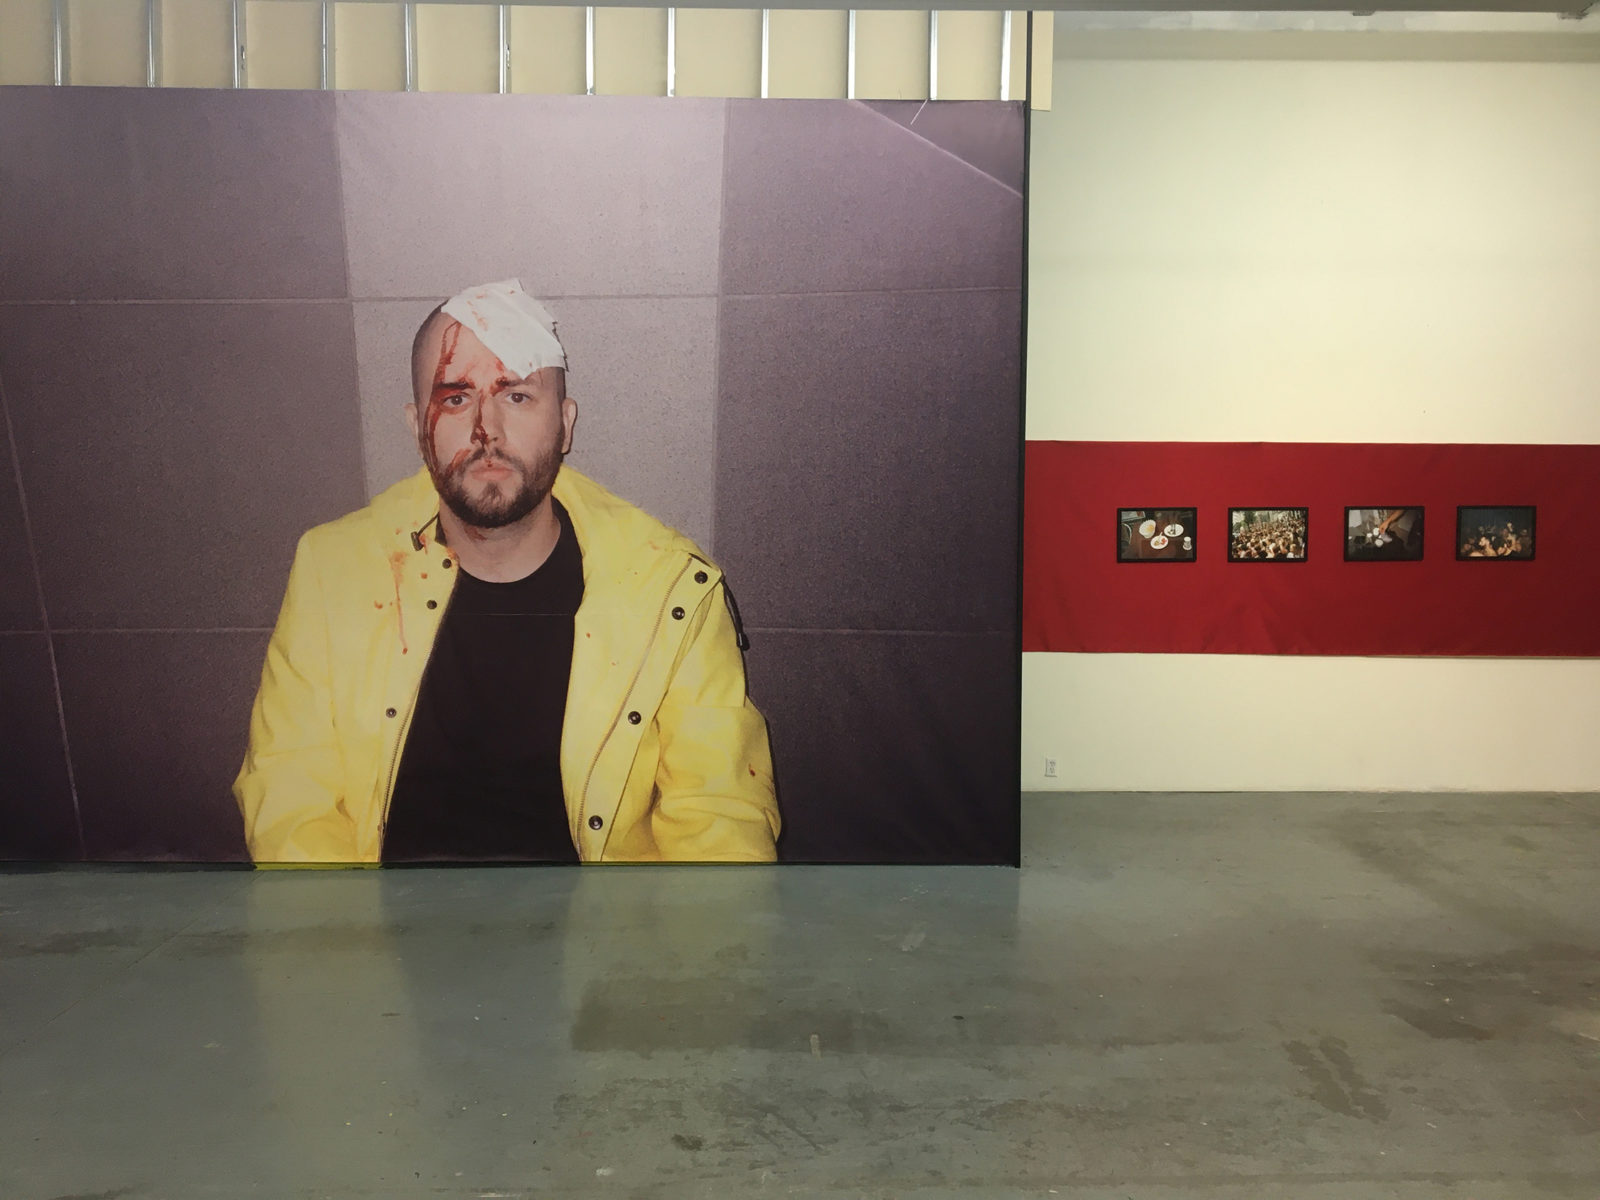 Anton Shebetko, It's Not The End of The World  installation view 2019